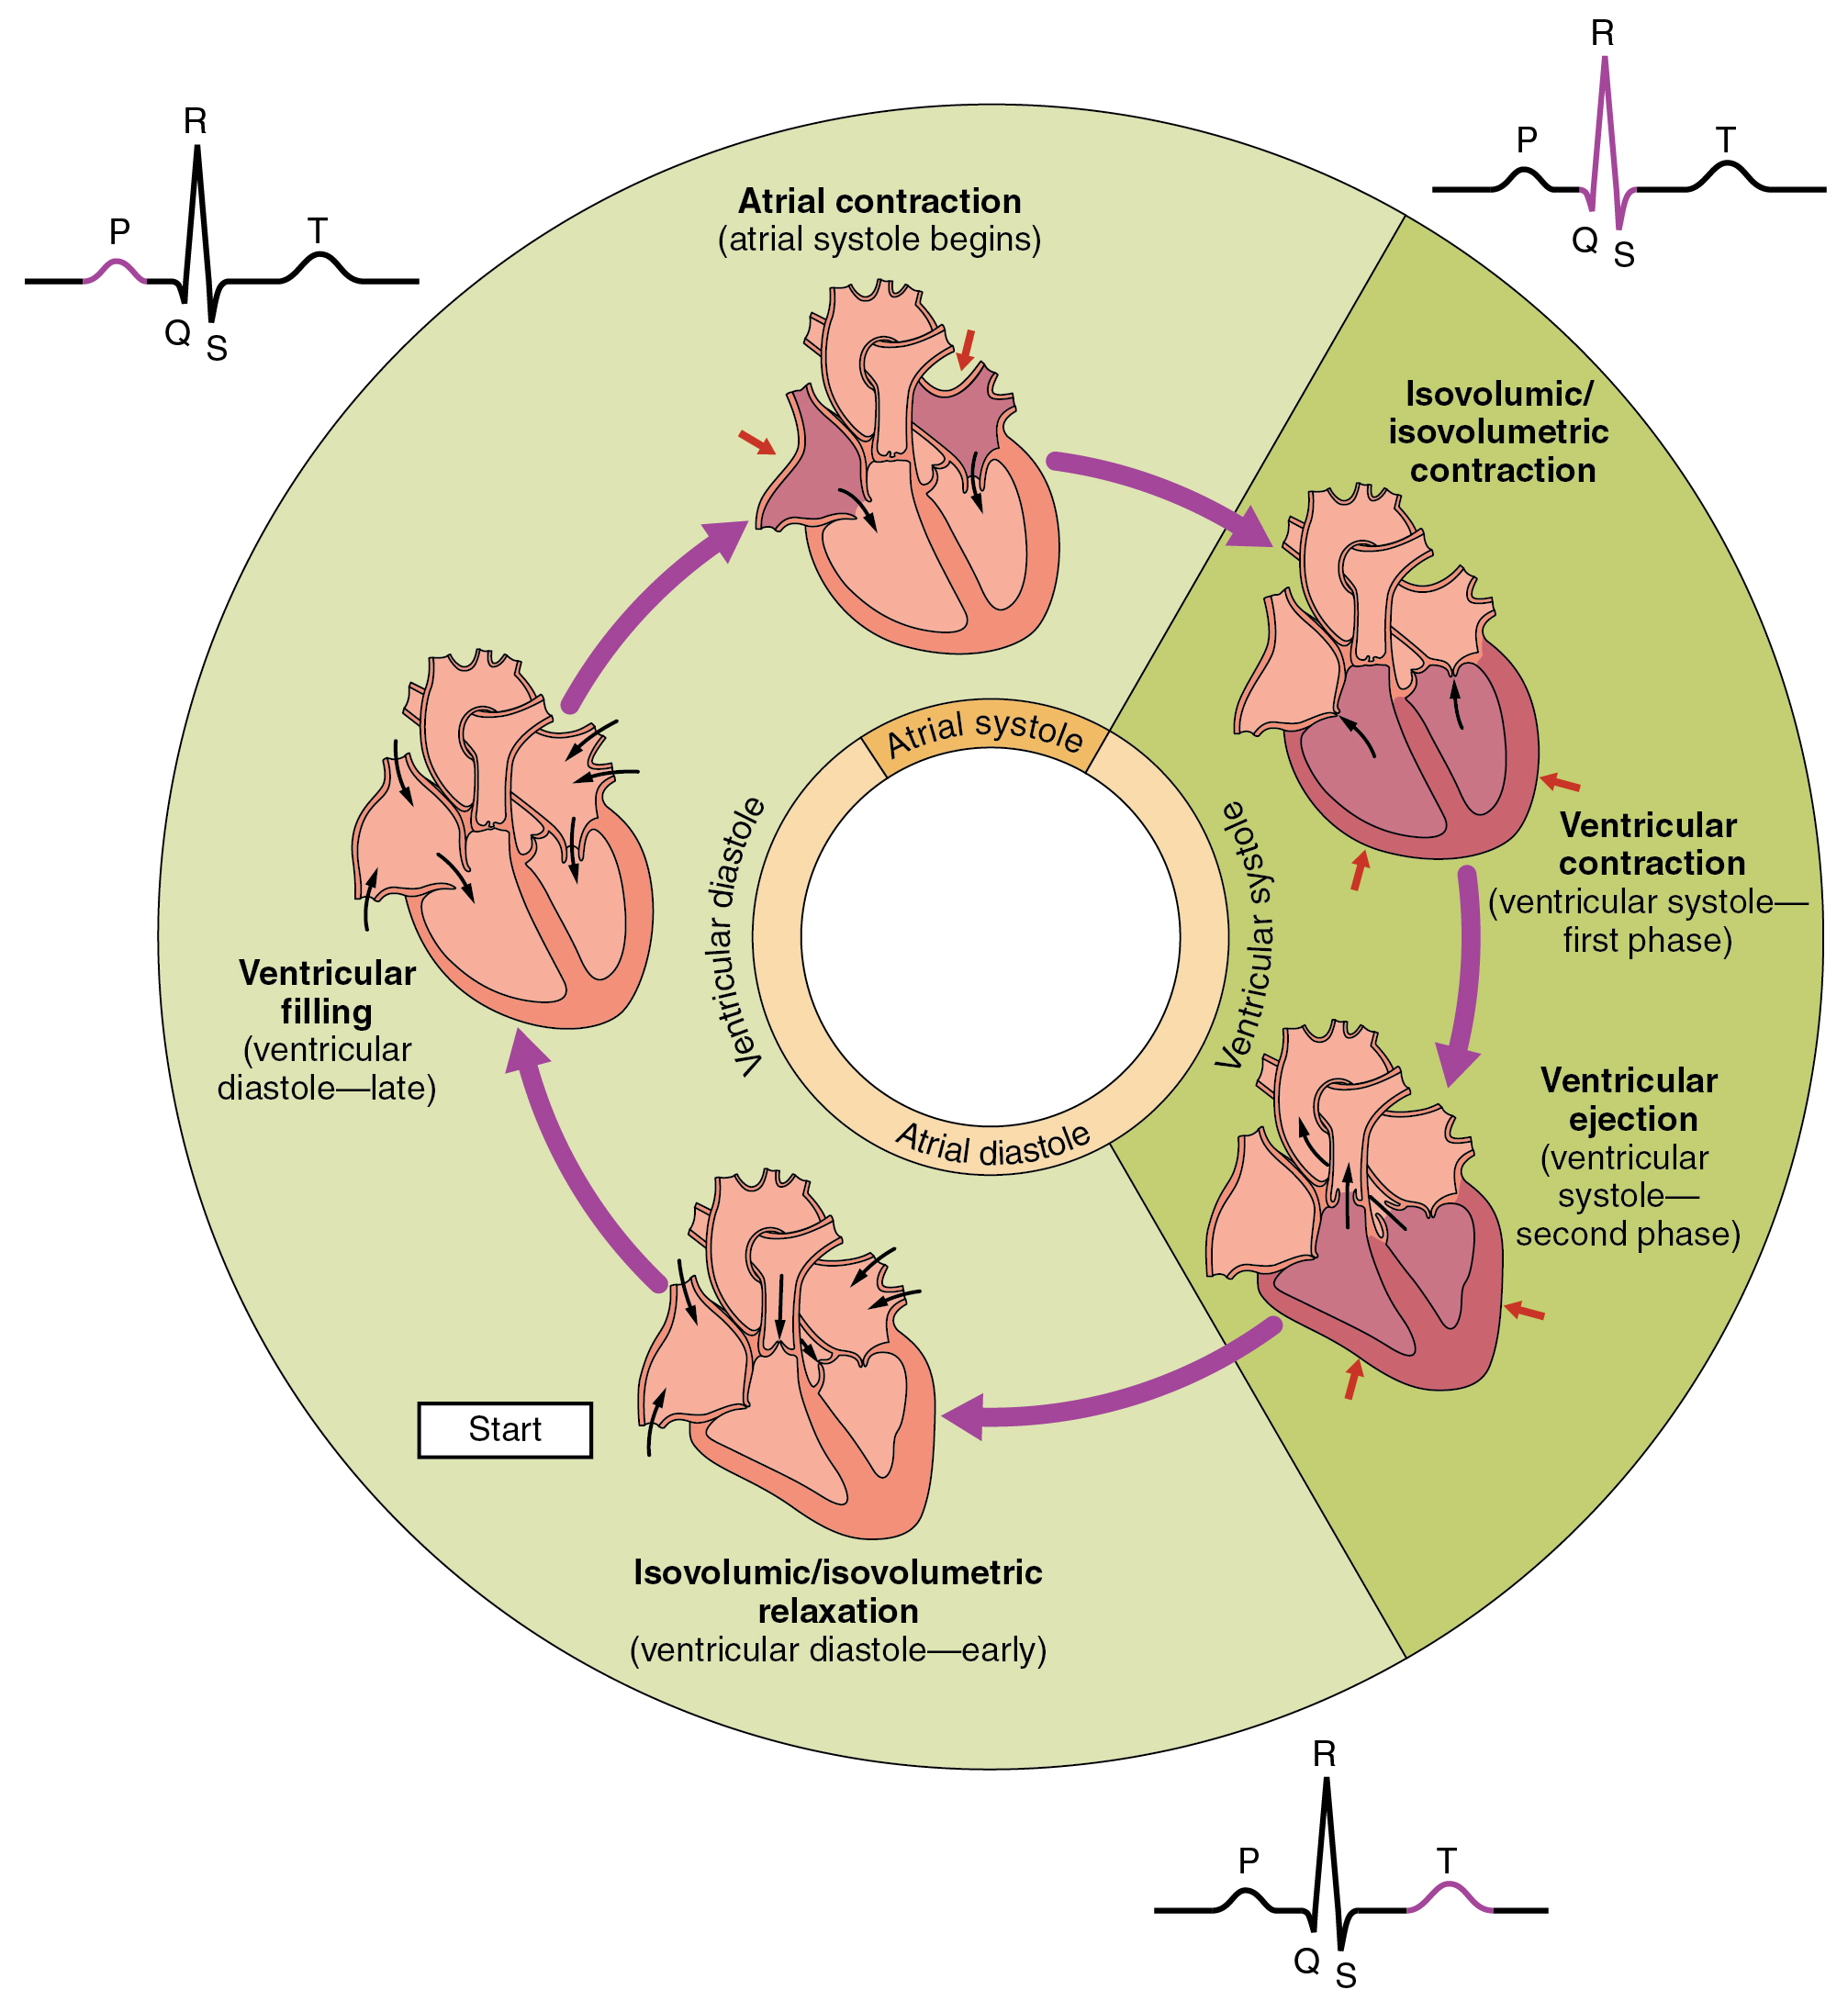 This pie chart shows the different phases of the cardiac cycle and details the atrial and ventricular stages.